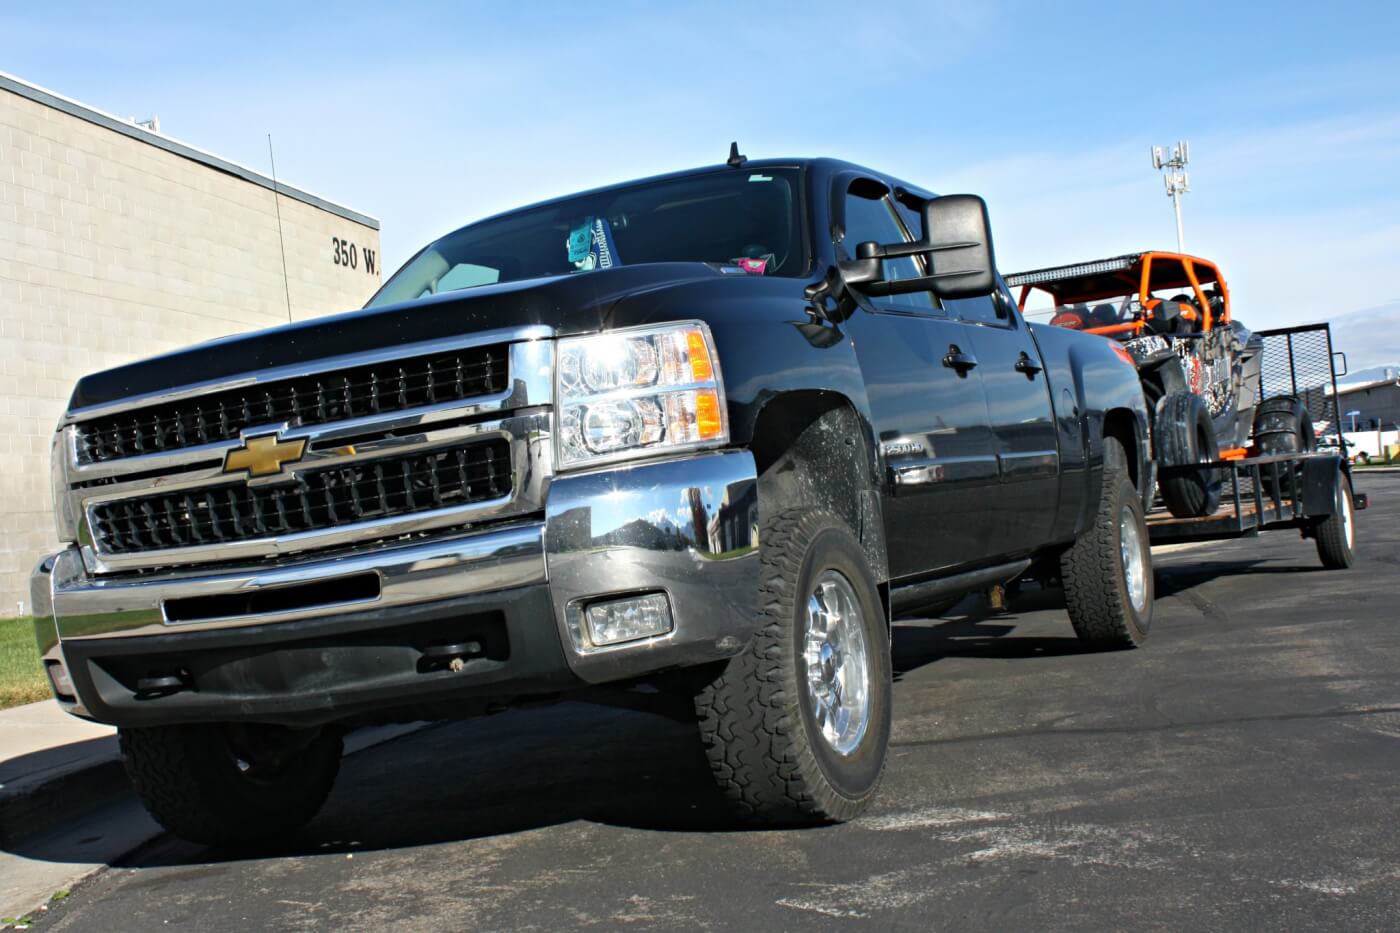 The 2007.5-2010 LMM Duramax was the first generation of Duramax to be equipped with the new emissions regulated Diesel Particulate Filter in the exhaust system, which helps reduce smoke and emissions expelled from the tailpipe. In the early years, this was thought to be the death of diesel performance, but with time, the aftermarket caught up and better towing performance and horsepower is now just a few bolt-on parts away.